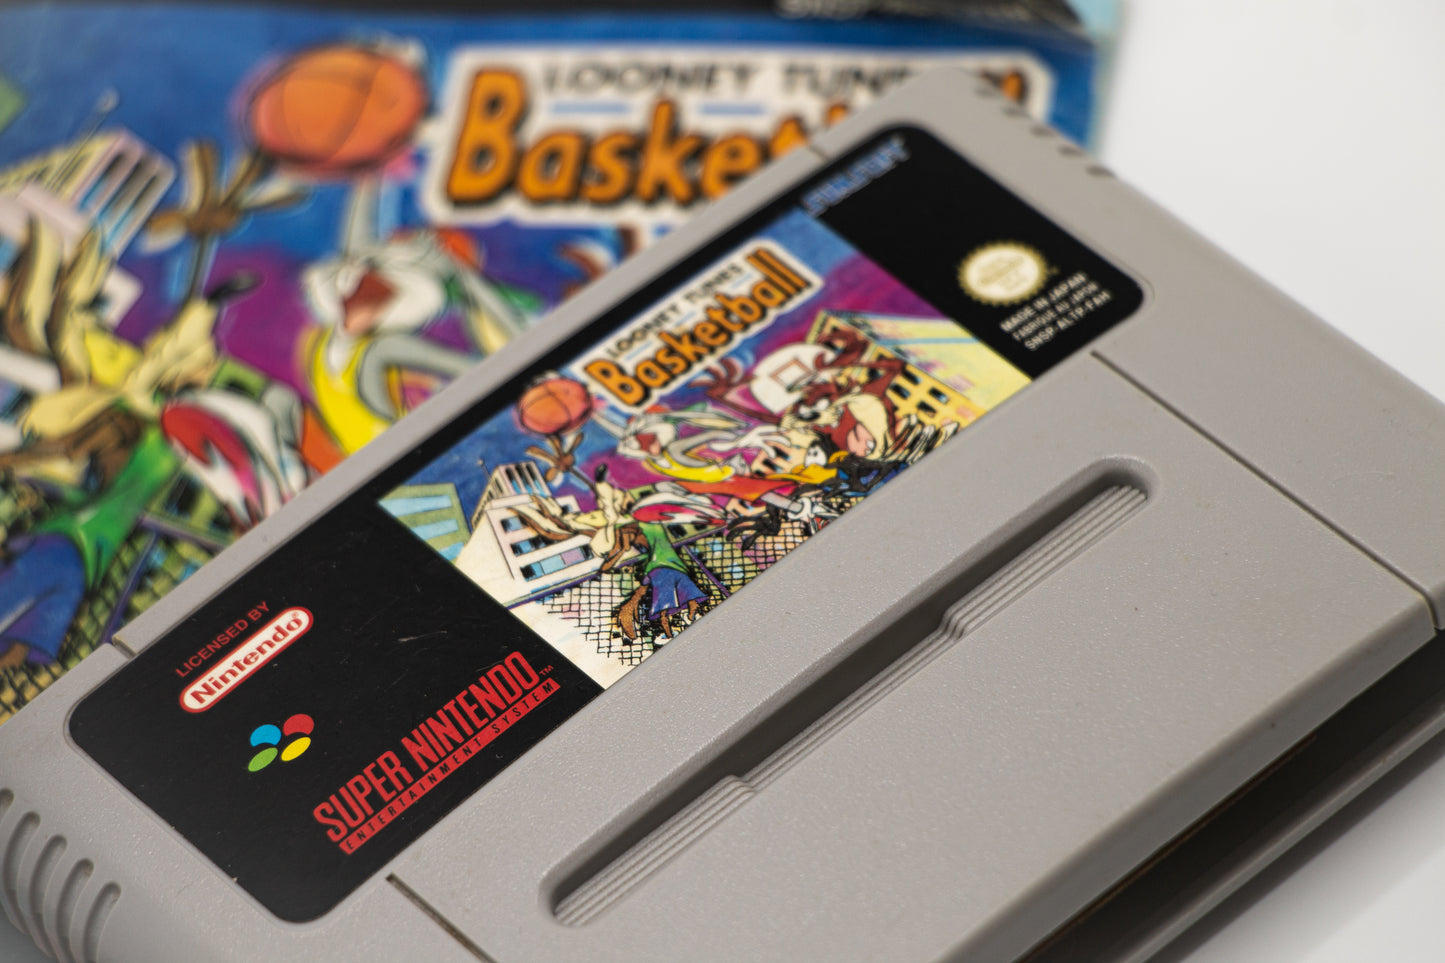 Looney Tunes Basketball SNES Cartridge and Manual